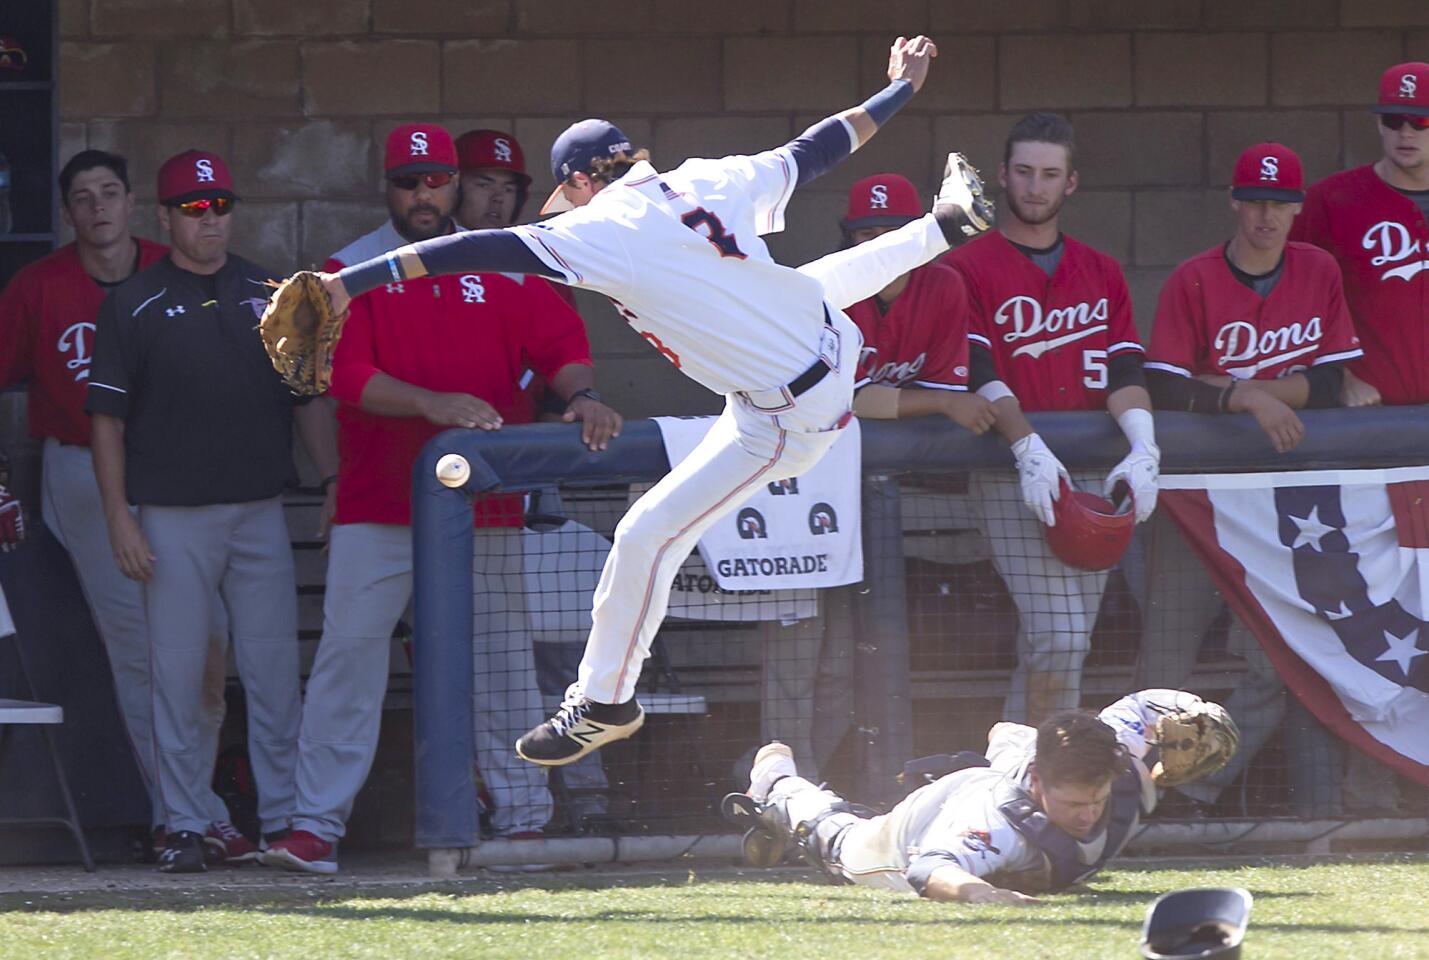 OCC third baseman Nolan Powers leaps over catcher Robert Teel as they go after a fly ball against Santa Ana in the second round of the Southern California Regional playoffs on Friday.